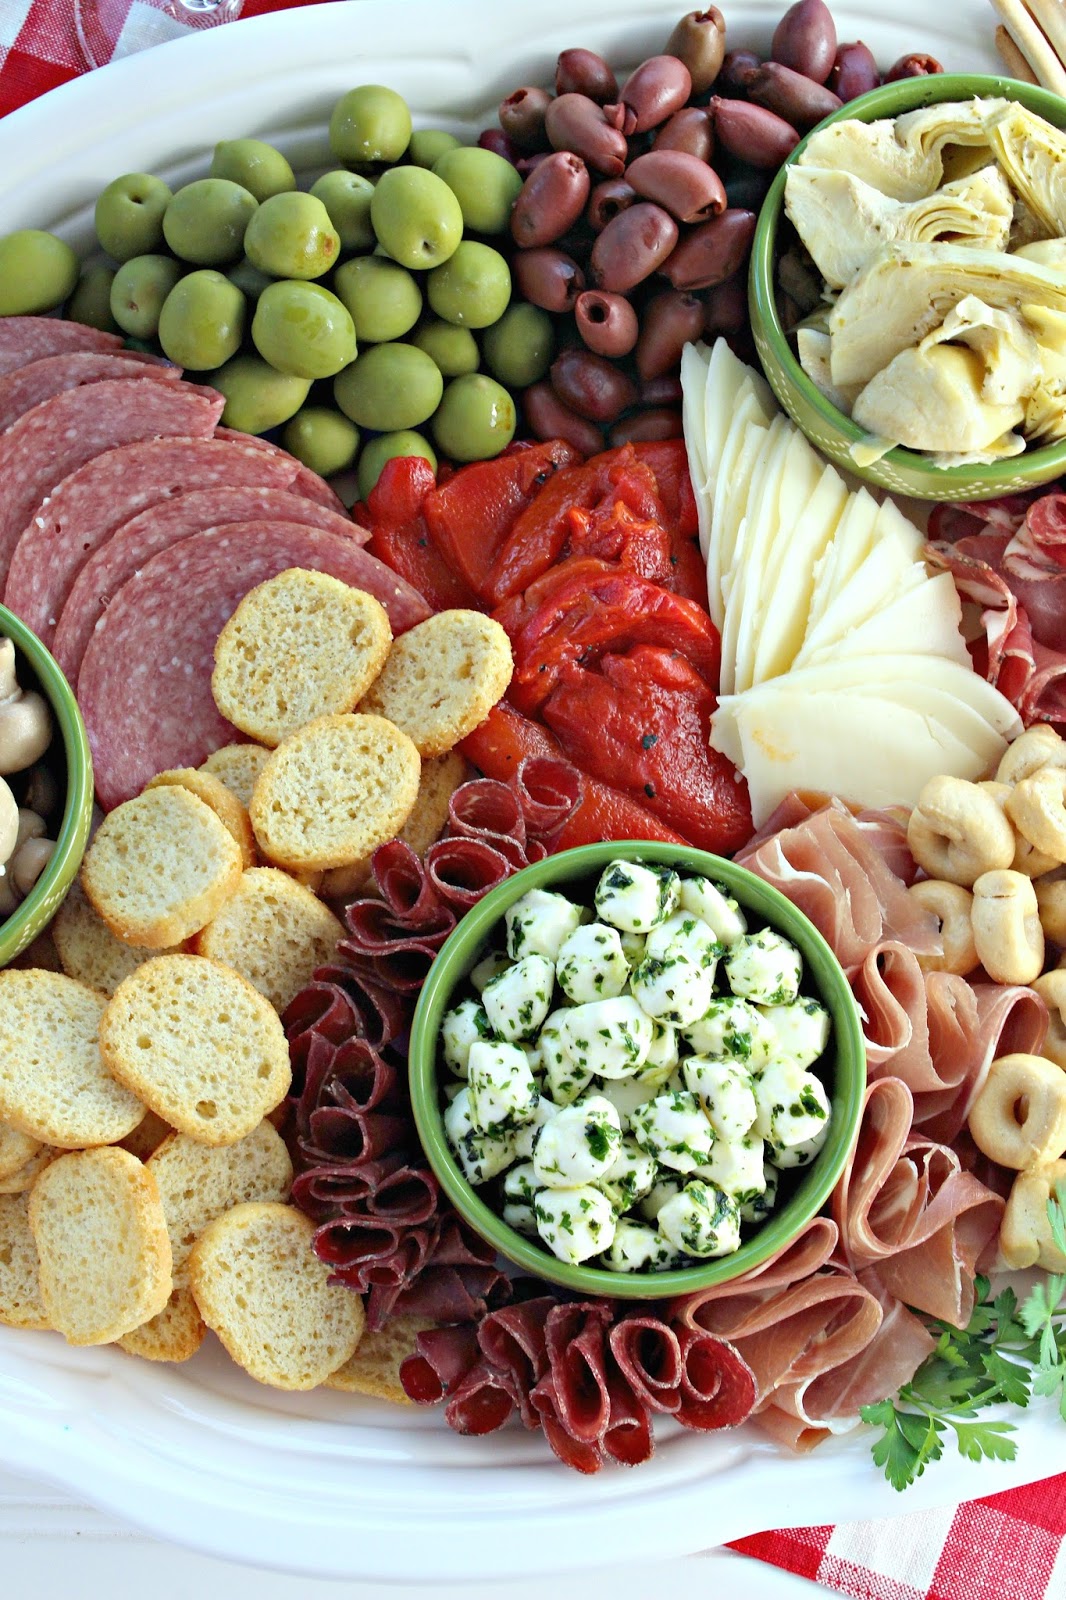 Love and Confections: How to Create an Antipasto Platter #BrunchWeek